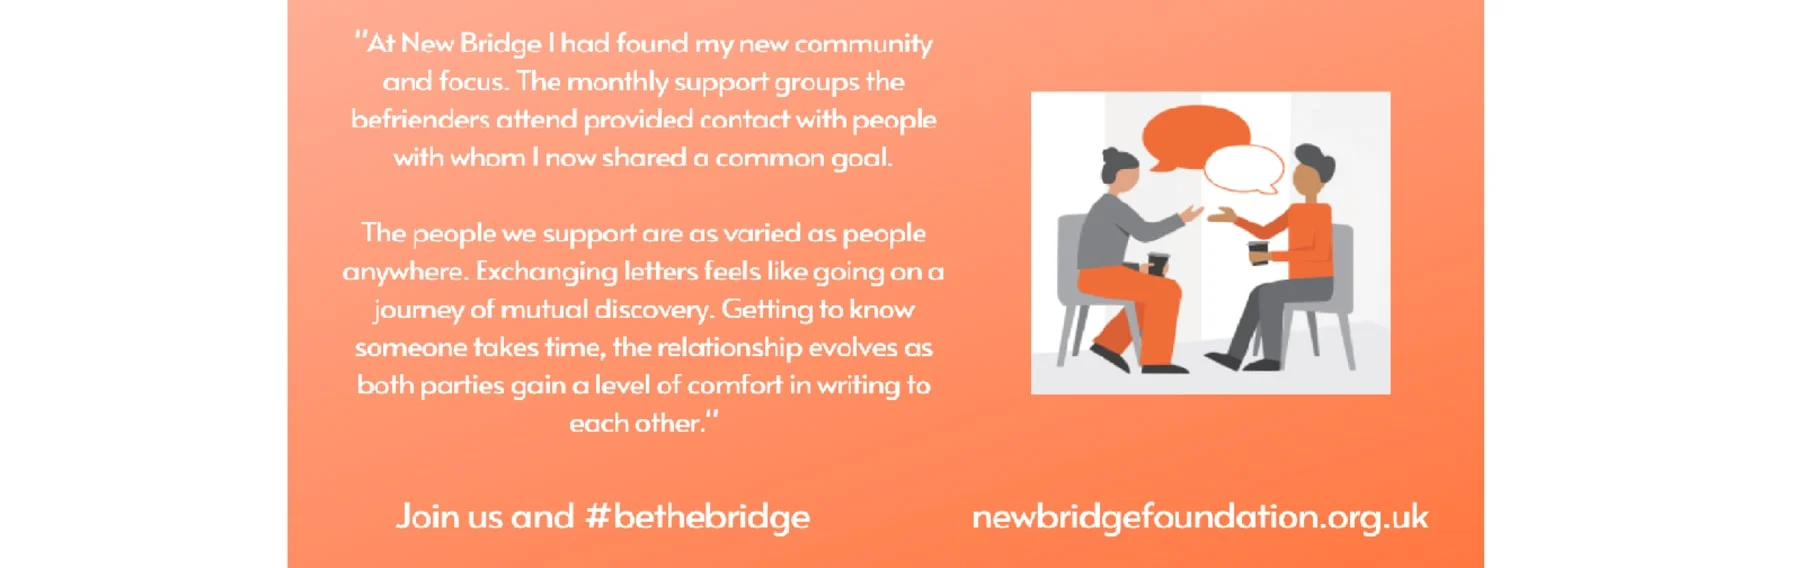 From full time work to retirement - how becoming a New Bridge volunteer helped me manage the transition